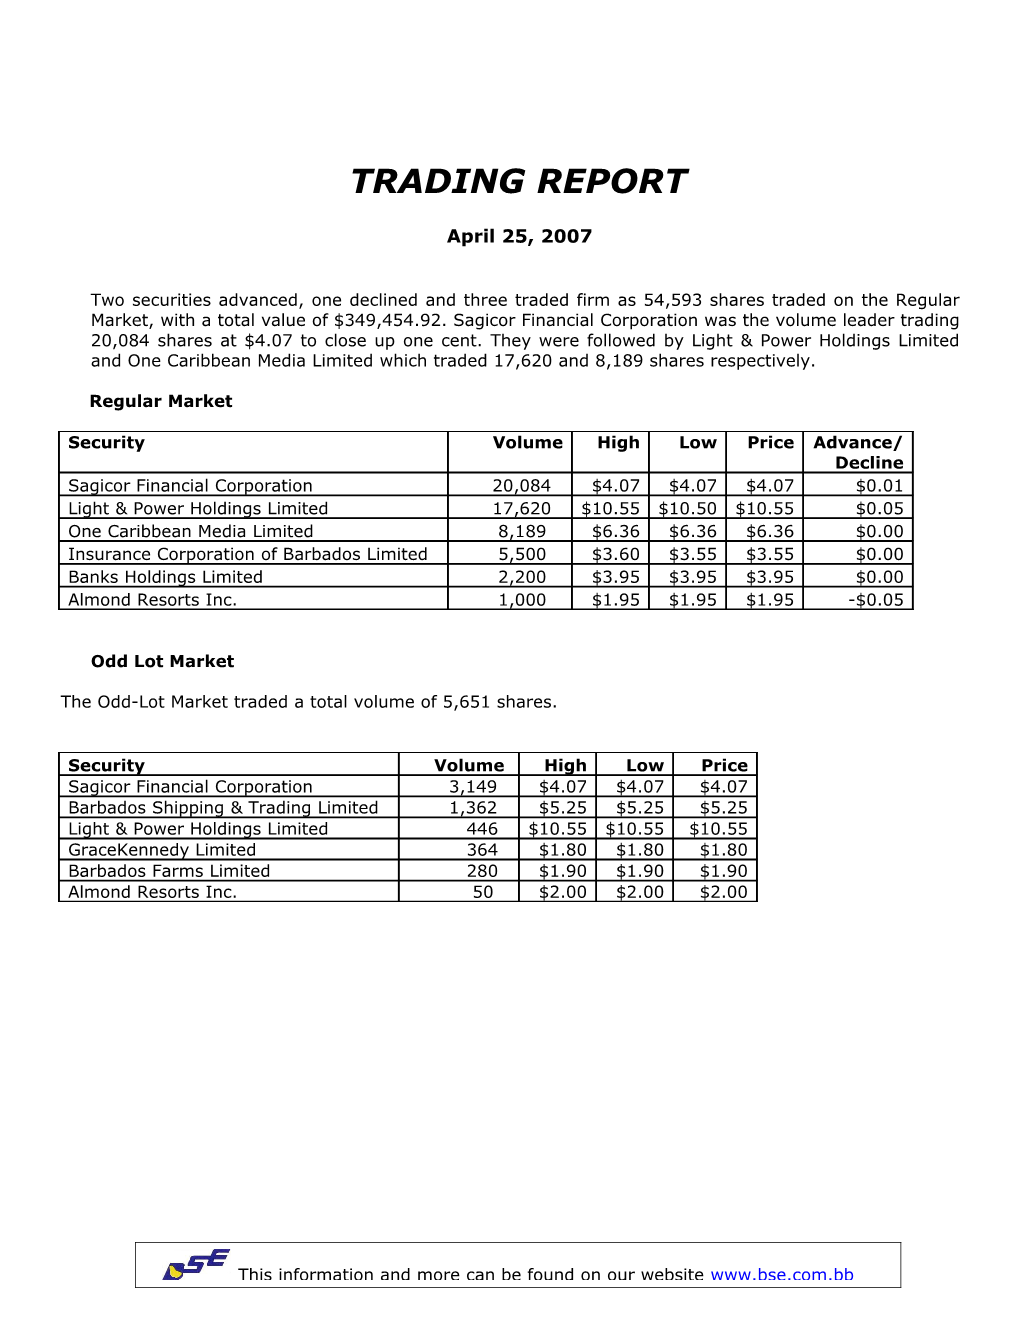 The Odd-Lot Market Traded a Total Volume of 5,651 Shares